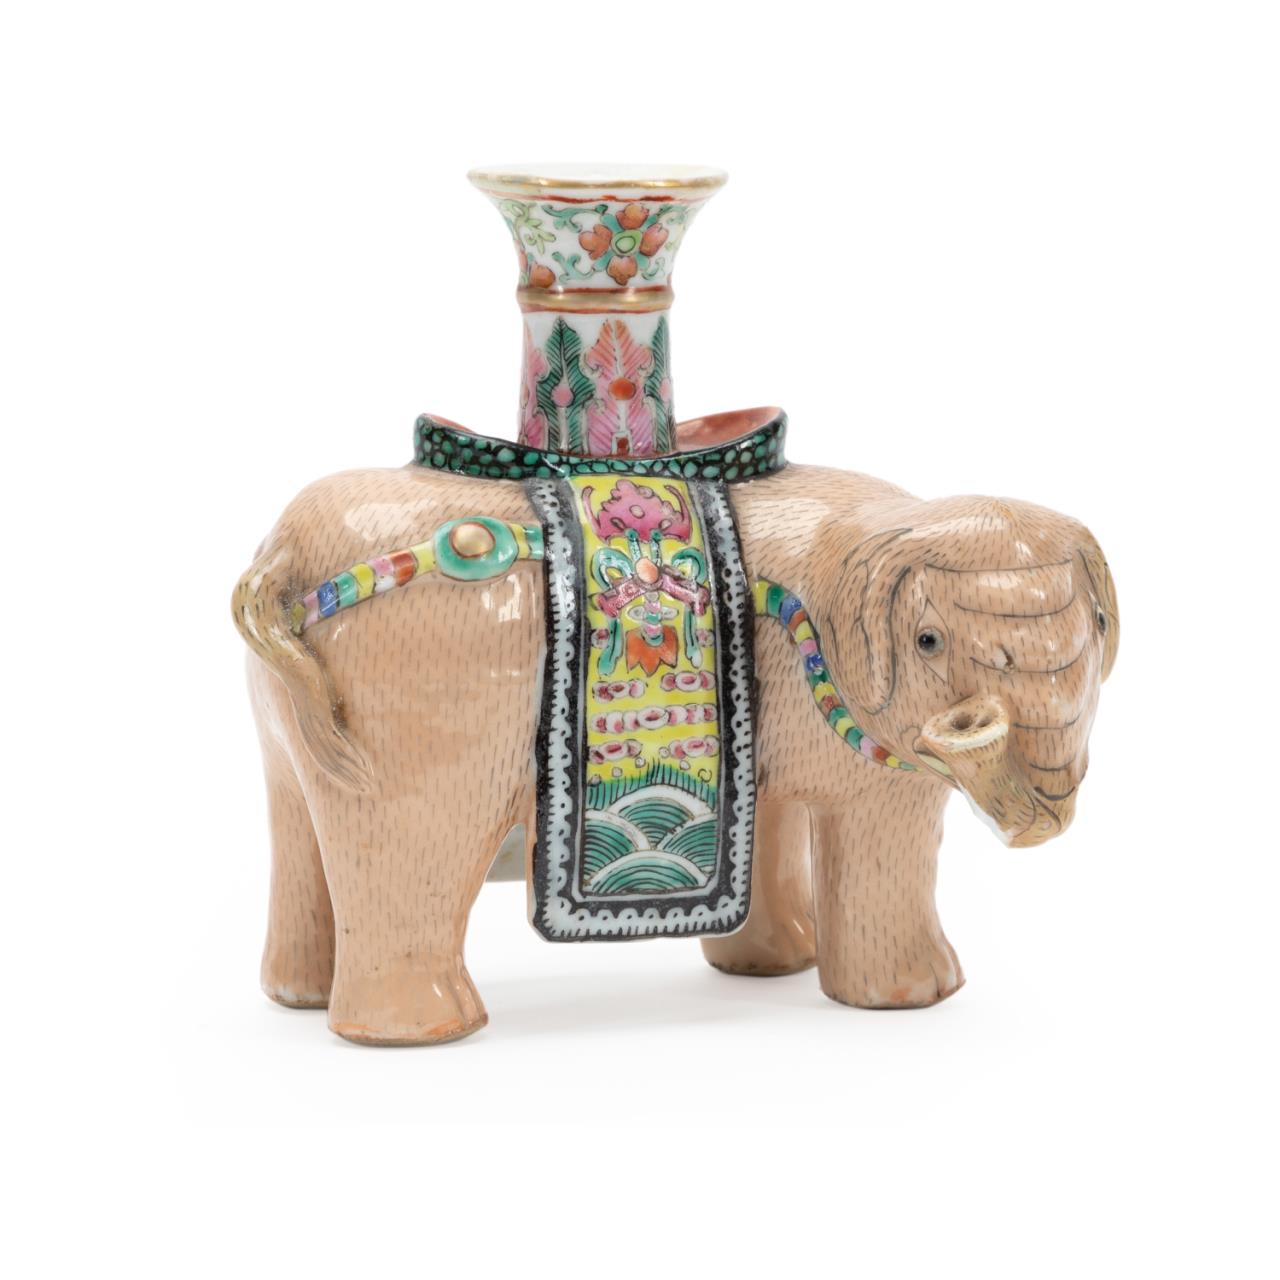 CHINESE EXPORT ELEPHANT JOSS OR 358196